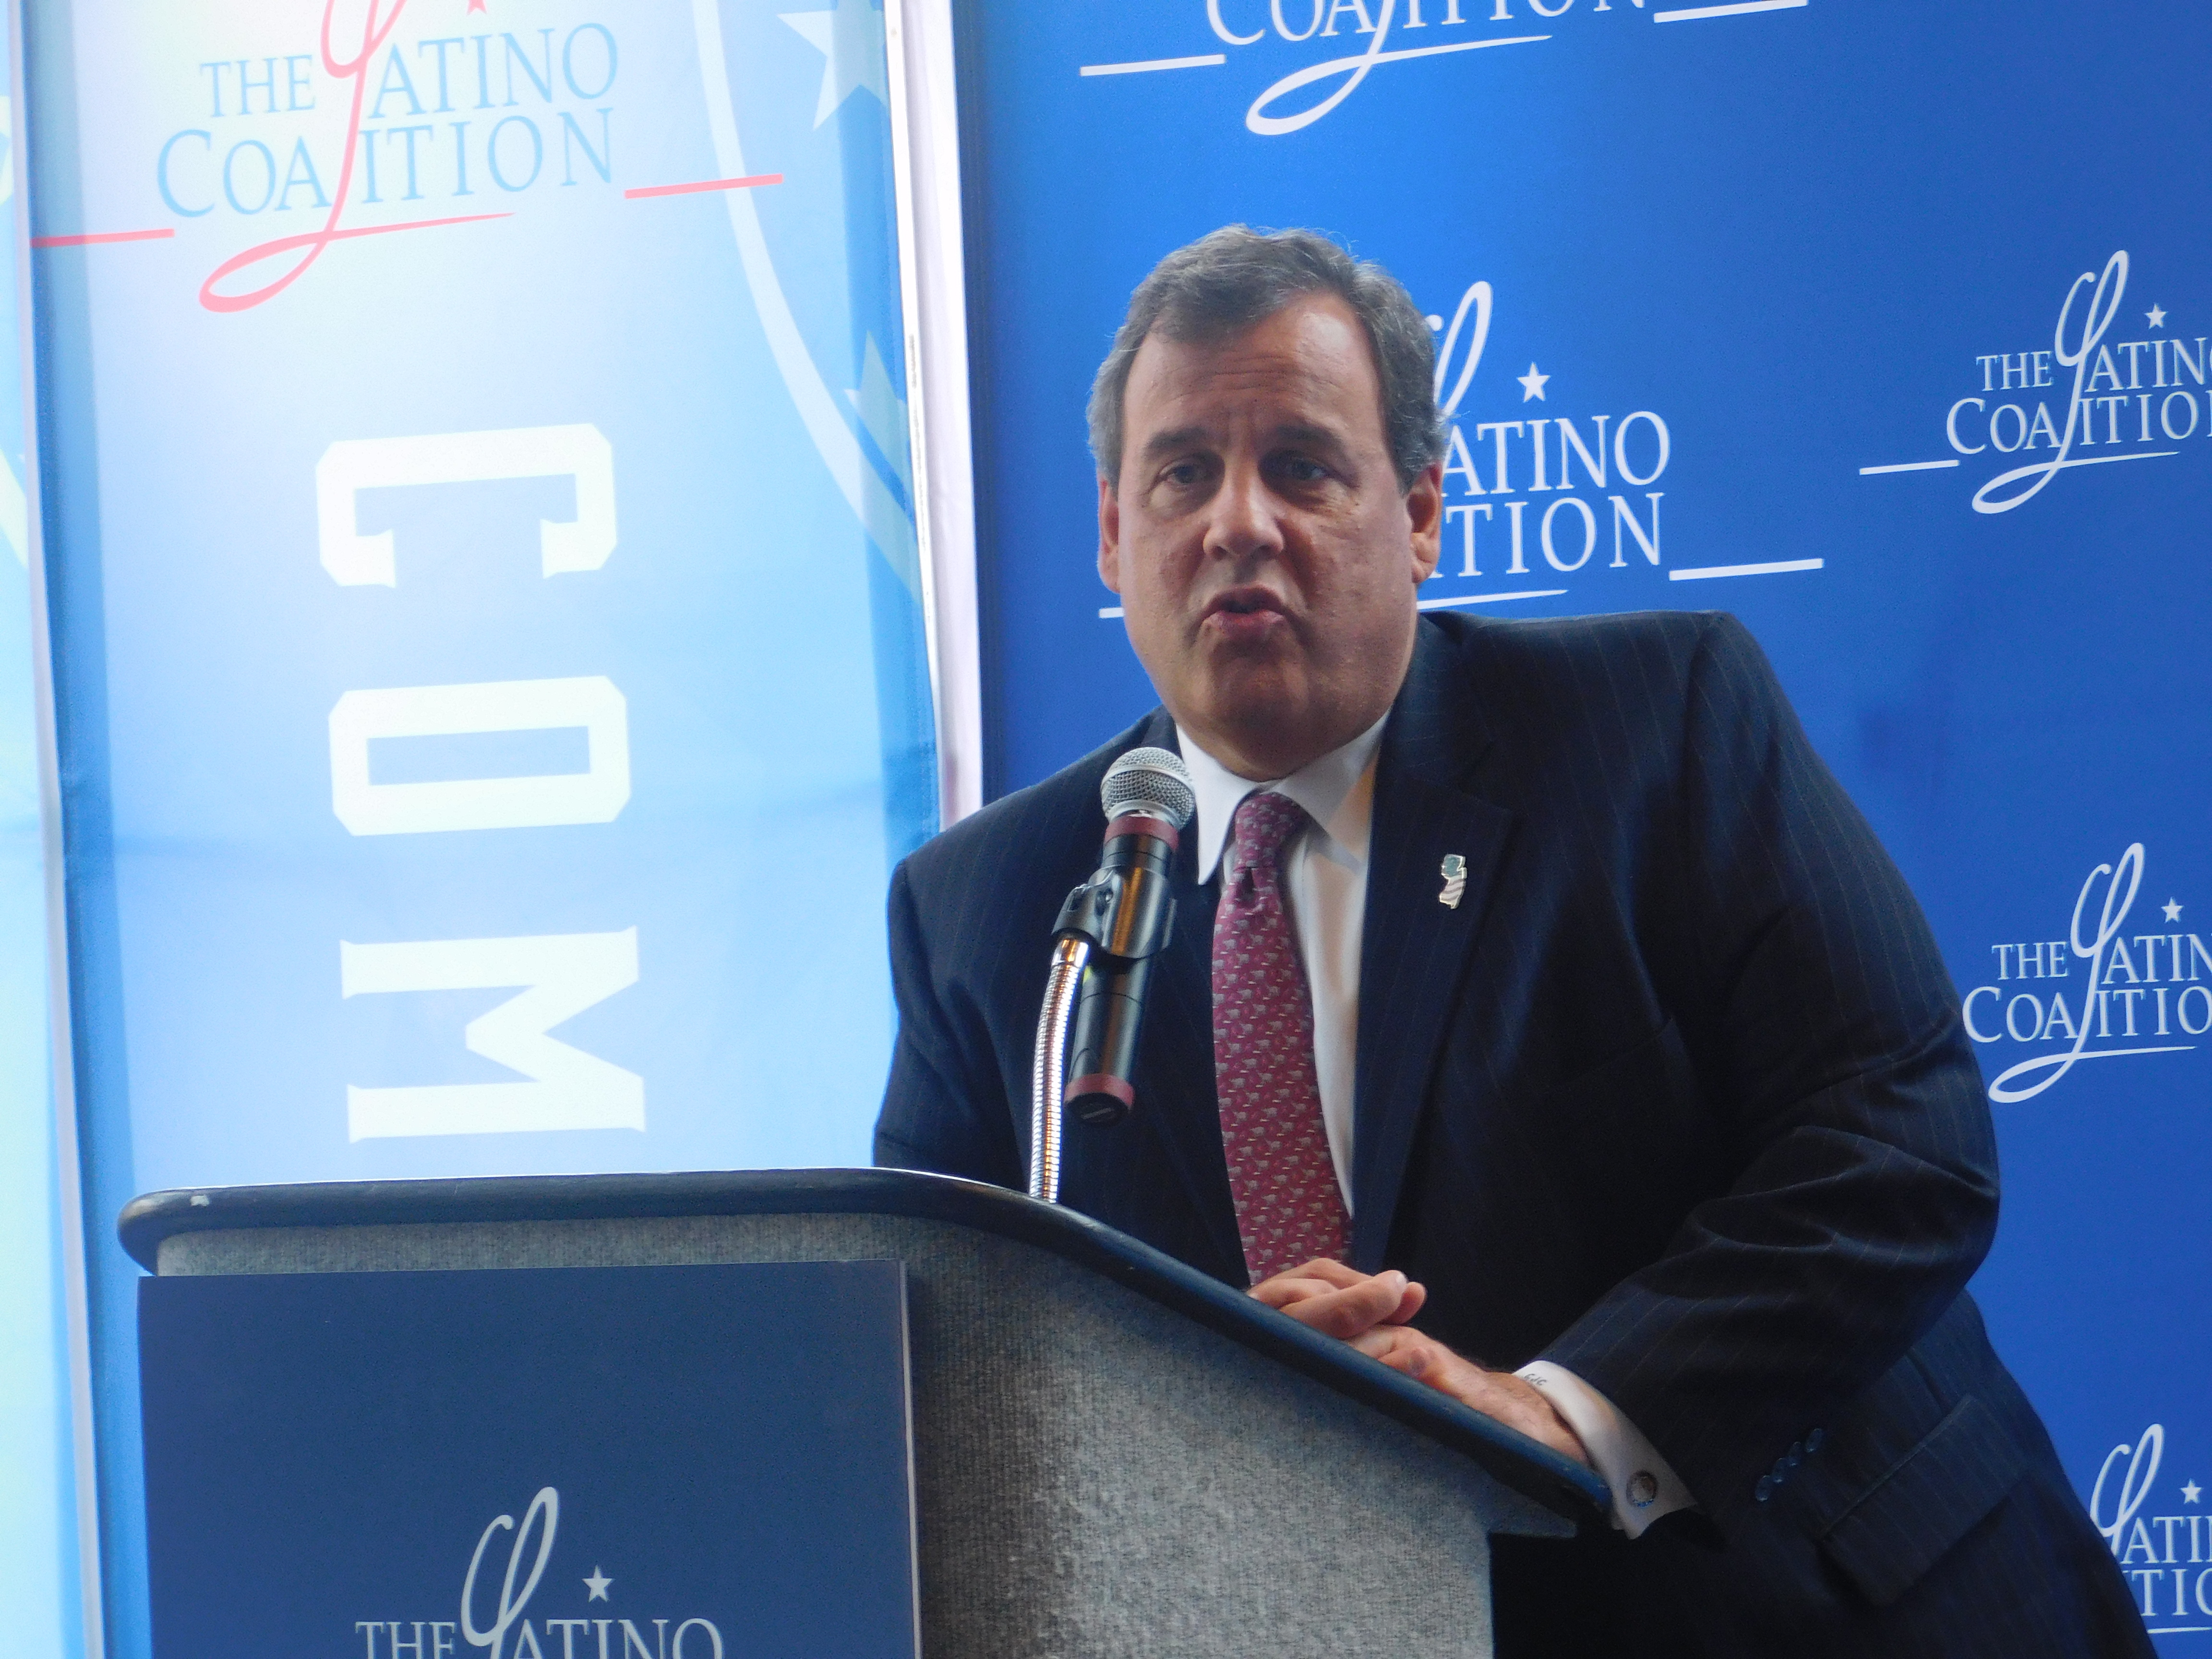 Christie addressed the Latino Coalition at the RNC.